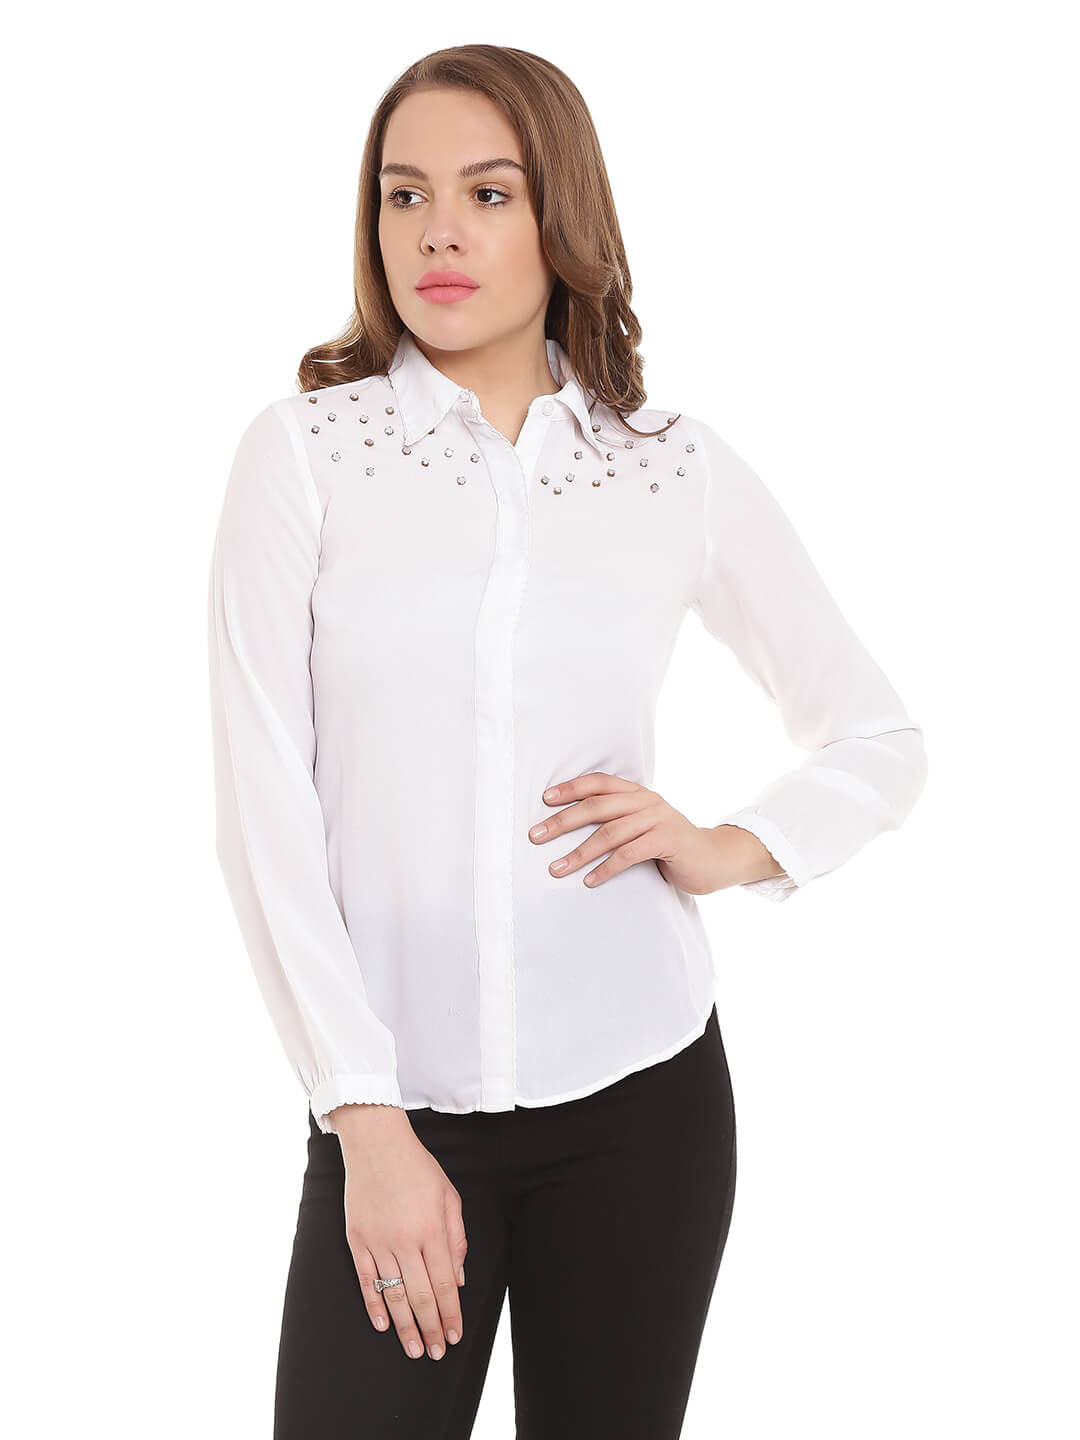 party wear white tops for women